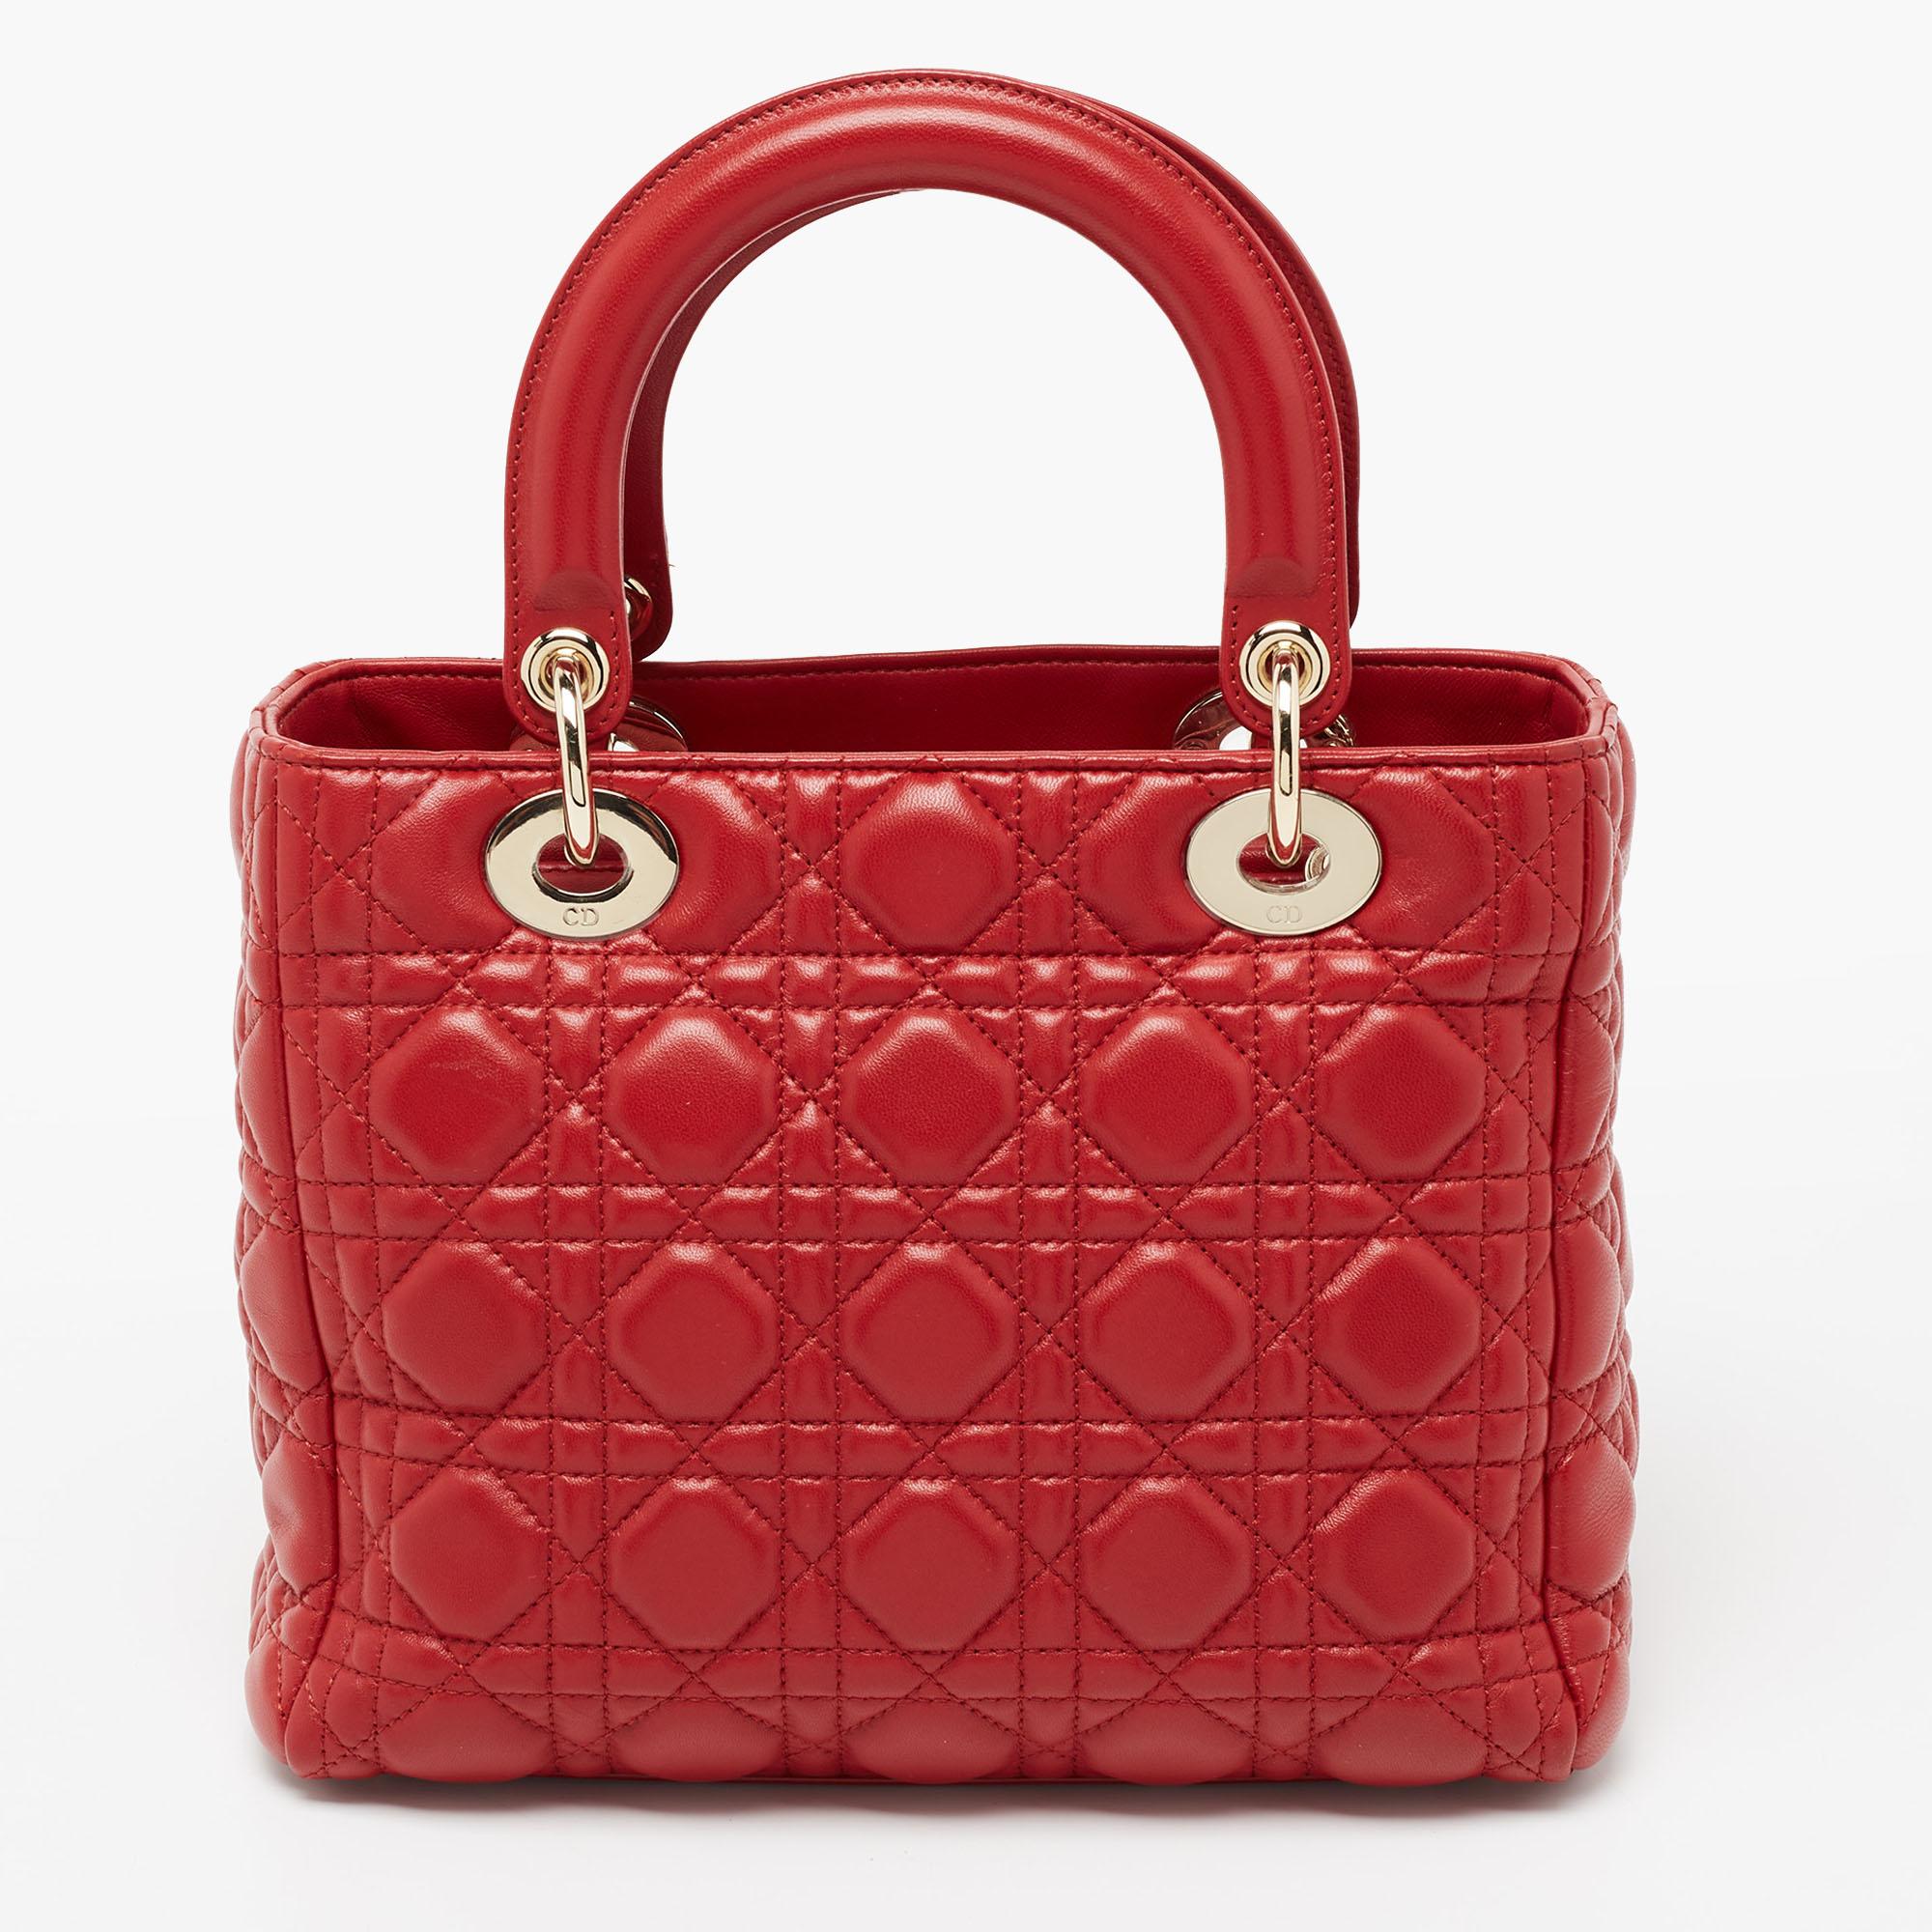 A timeless status and great design mark the Lady Dior tote. It is an iconic bag that people continue to invest in to this day. We have here this red Lady Dior tote crafted from Cannage leather. The bag is complete with two top handles, two shoulder